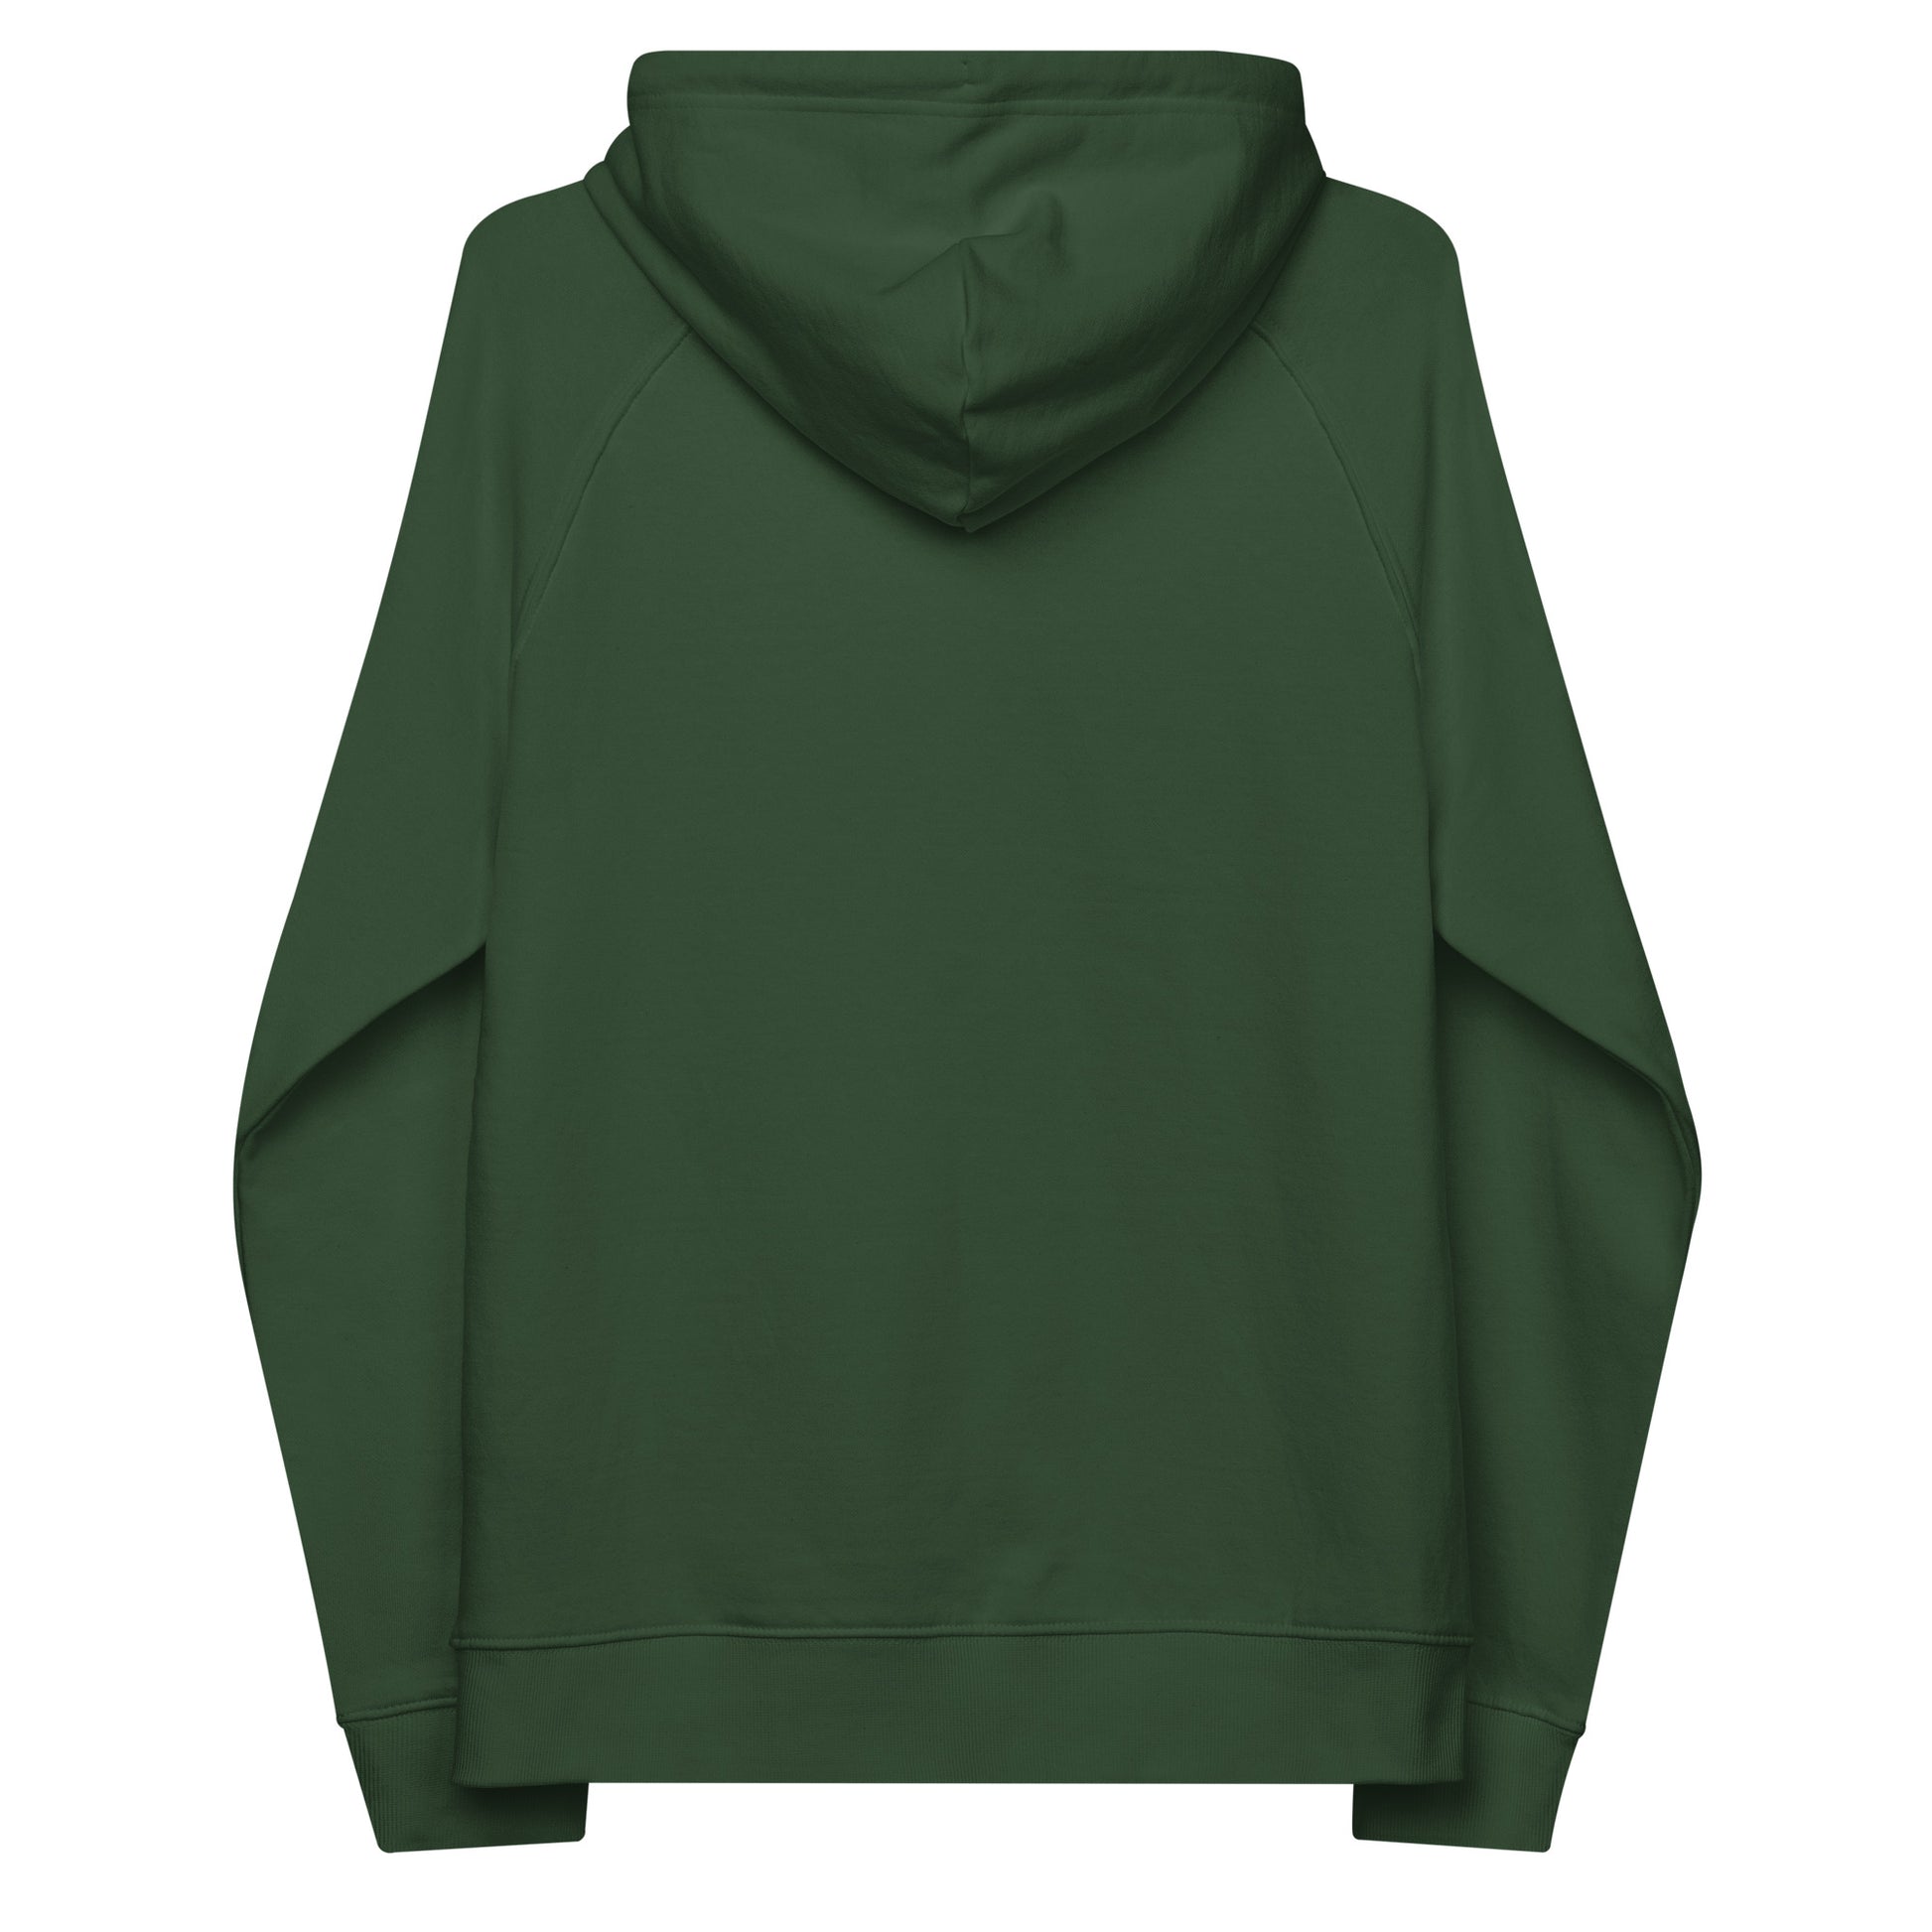 City Organic Hoodie - Old Gold • AKL Auckland • YHM Designs - Image 09